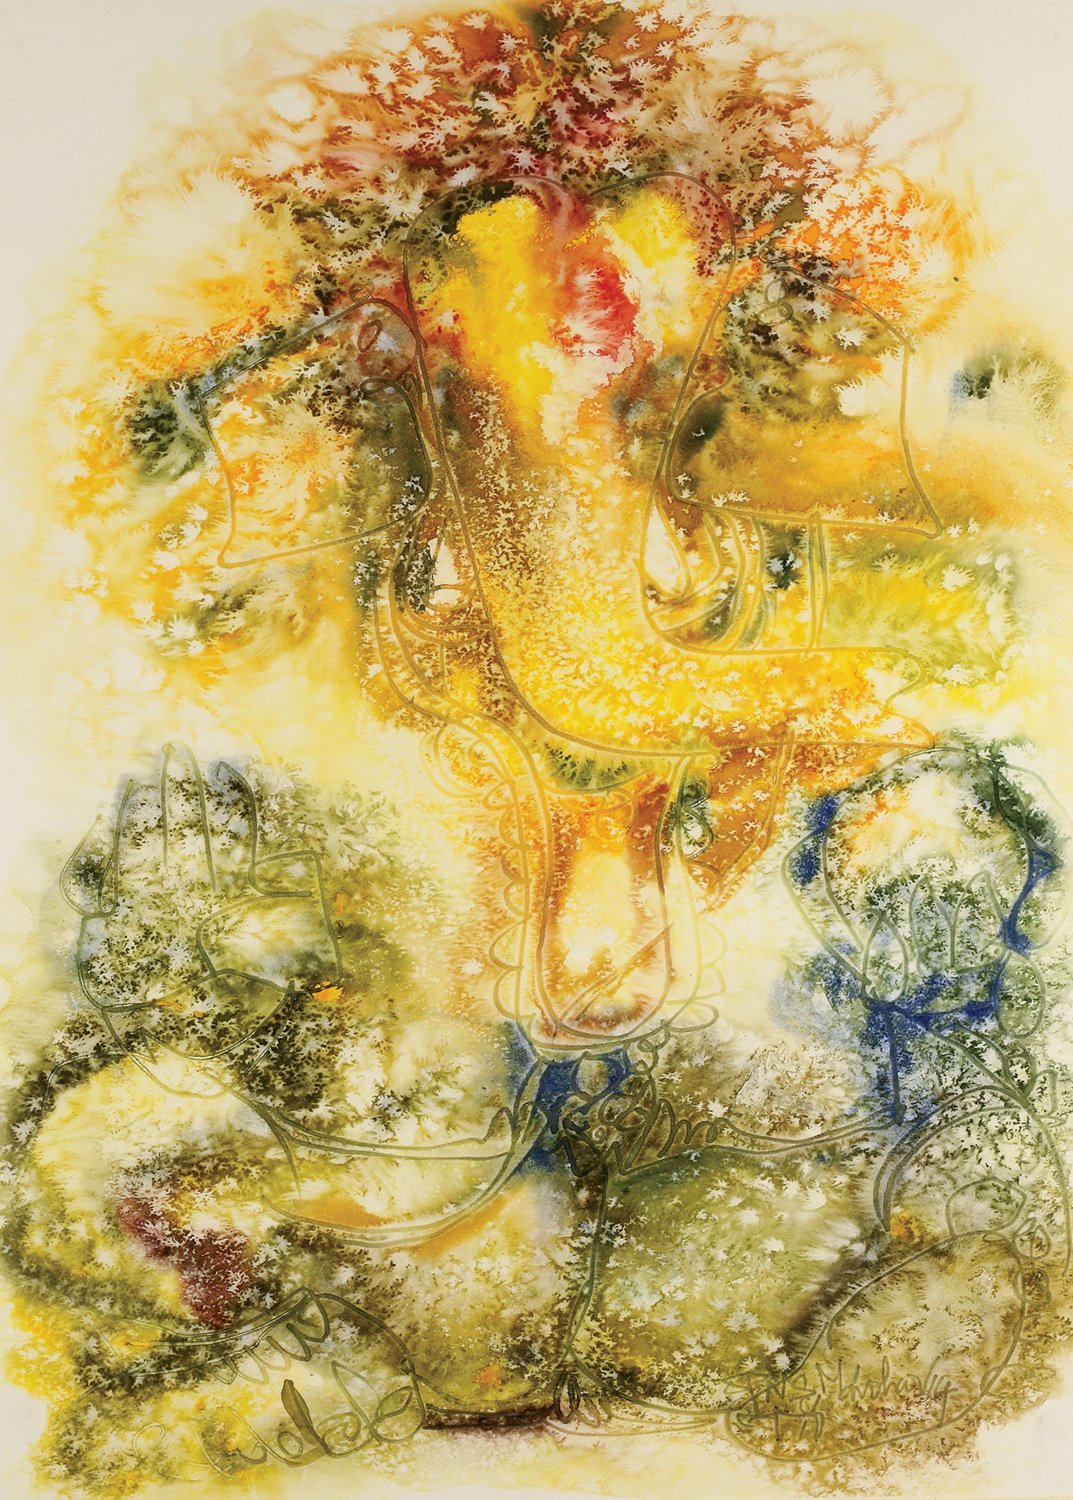 Ganesha 24|N.S. Manohar- Water colour on Board, 2014, 29 x 21 inches